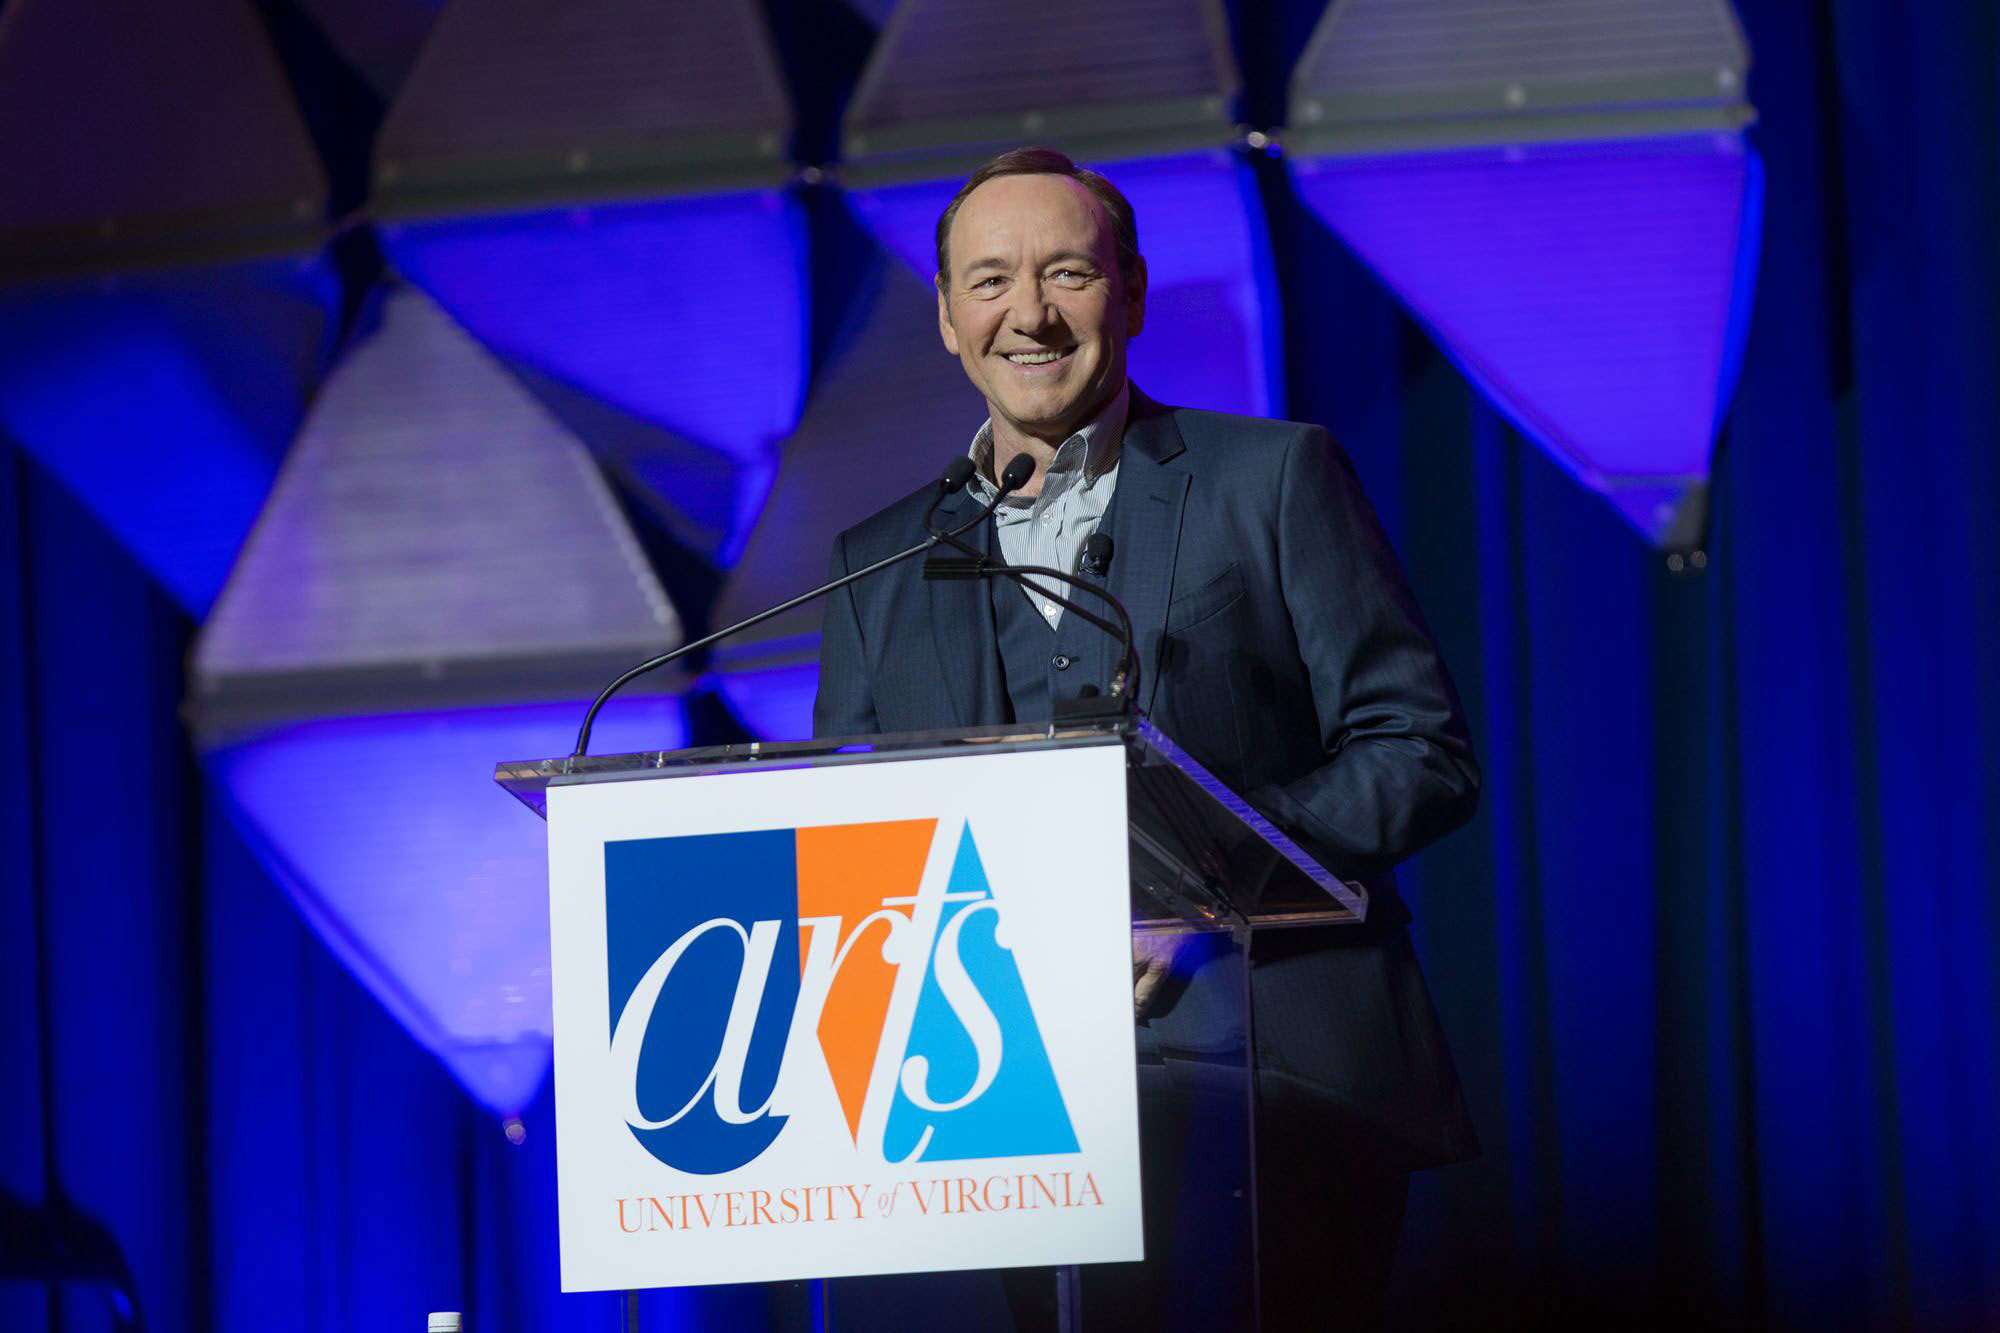 Kevin Spacey speaking at a podium